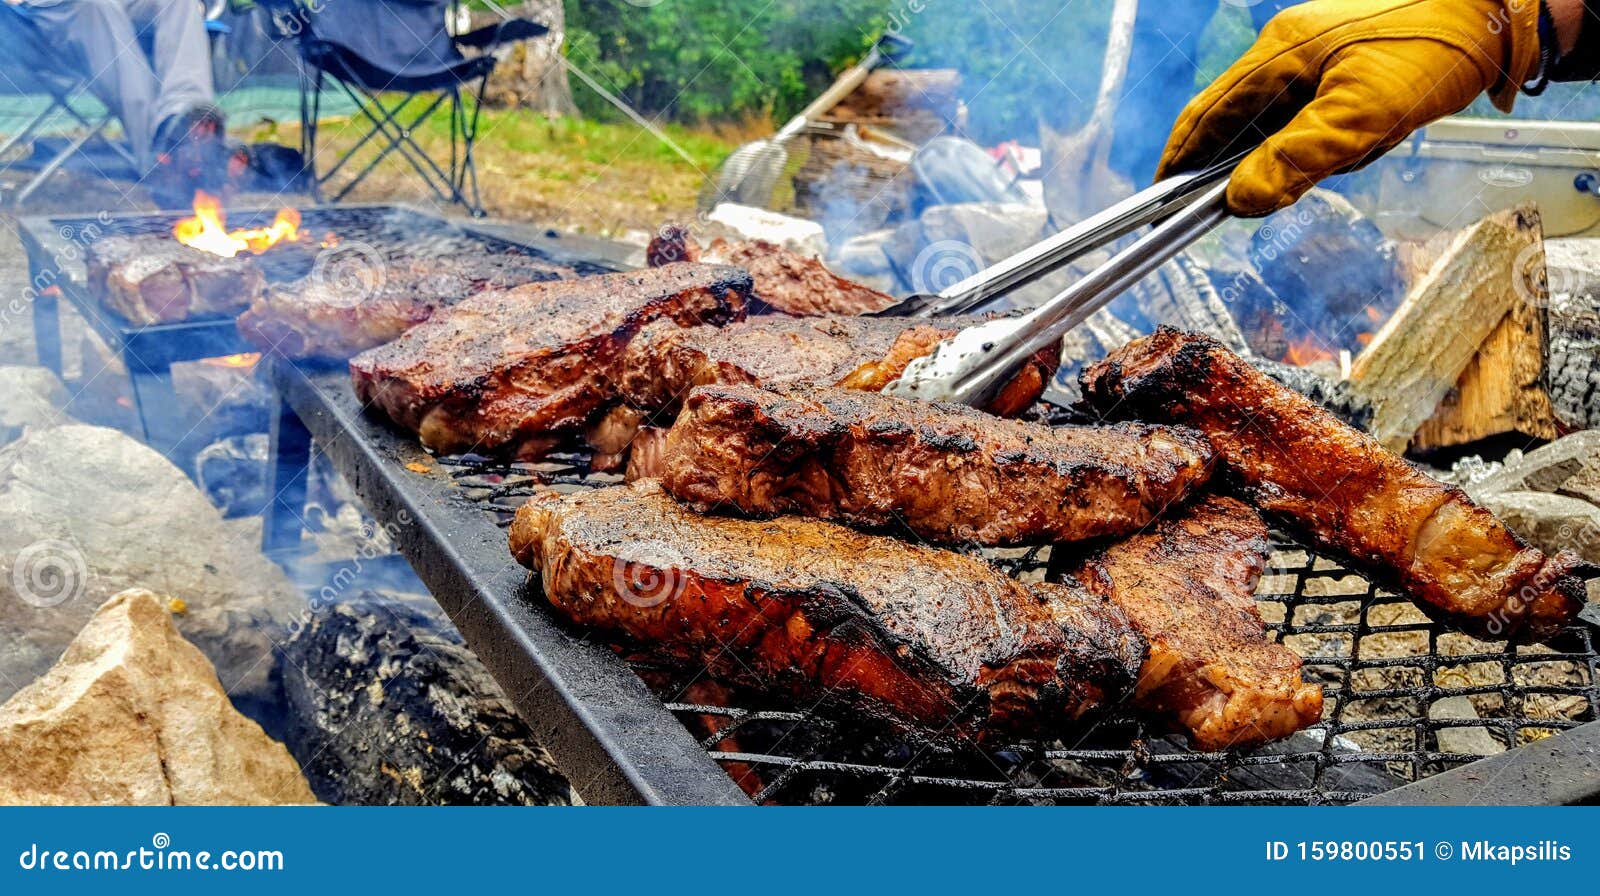 11,384 Bbq - & Royalty-Free Stock Photos from Dreamstime